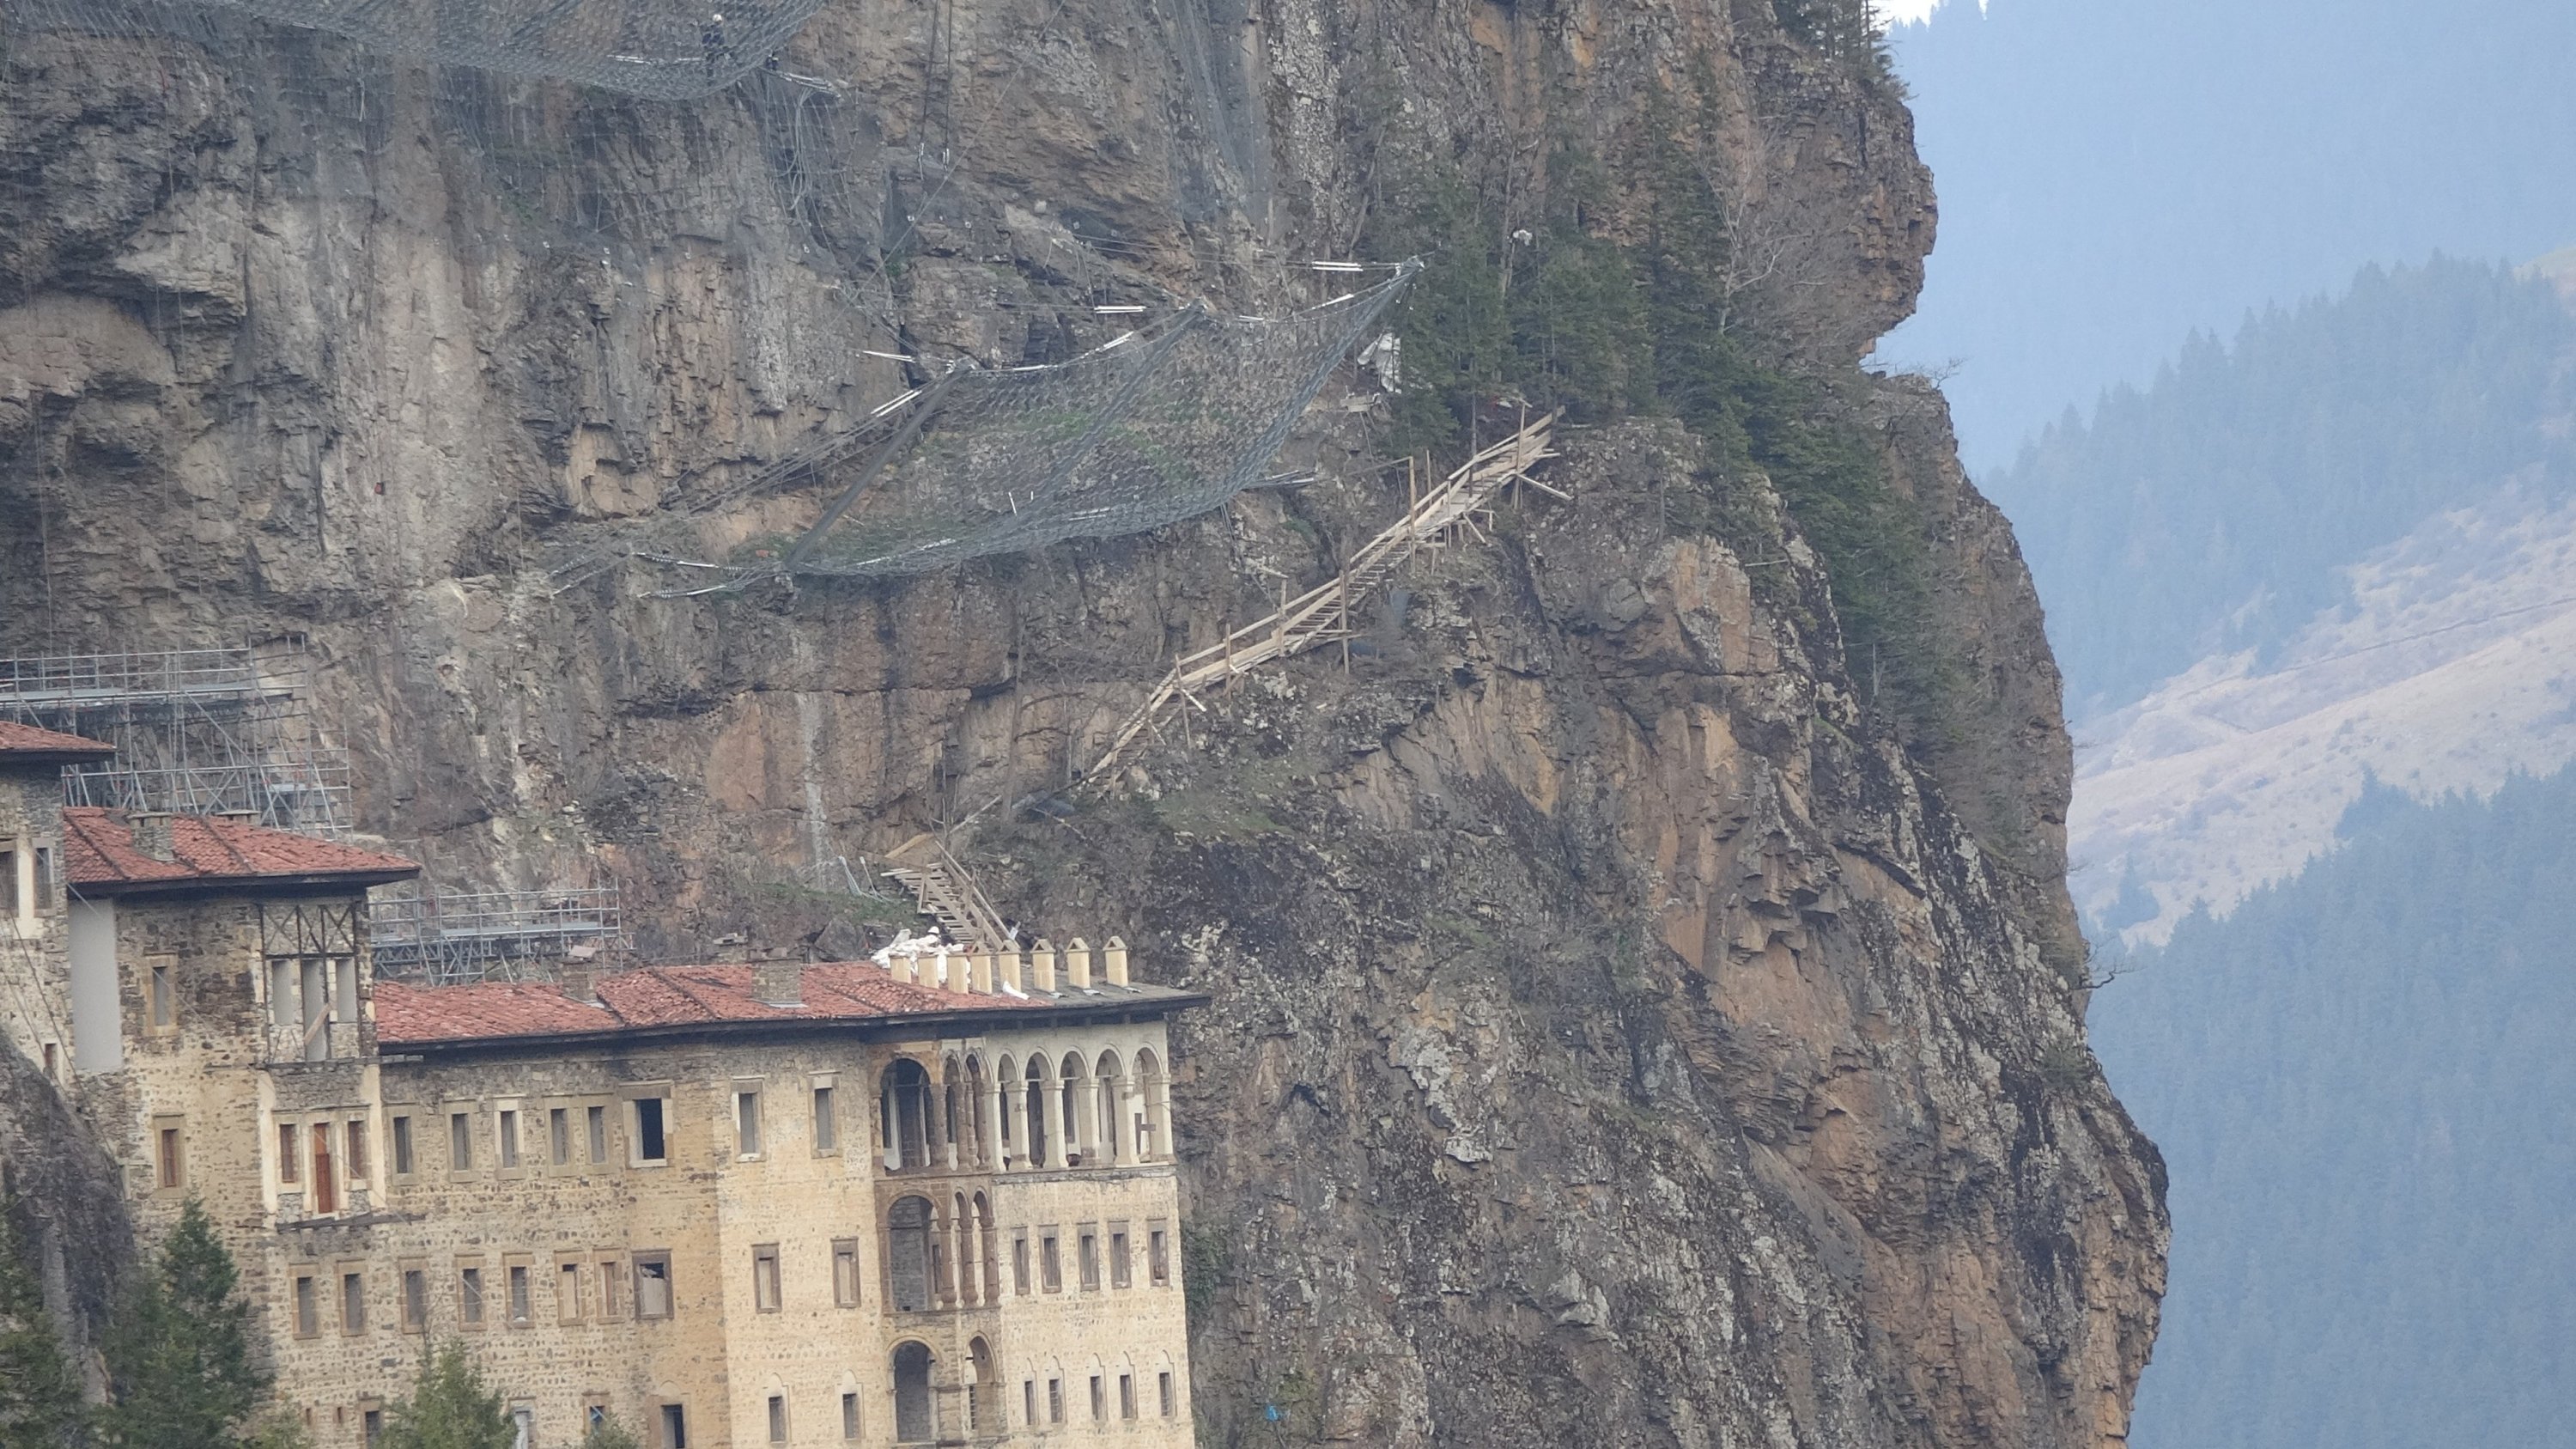 Sümela Monastery stands constructed out of the rock of a mountain, Trabzon, Turkey, April 26, 2021. (IHA Photo)